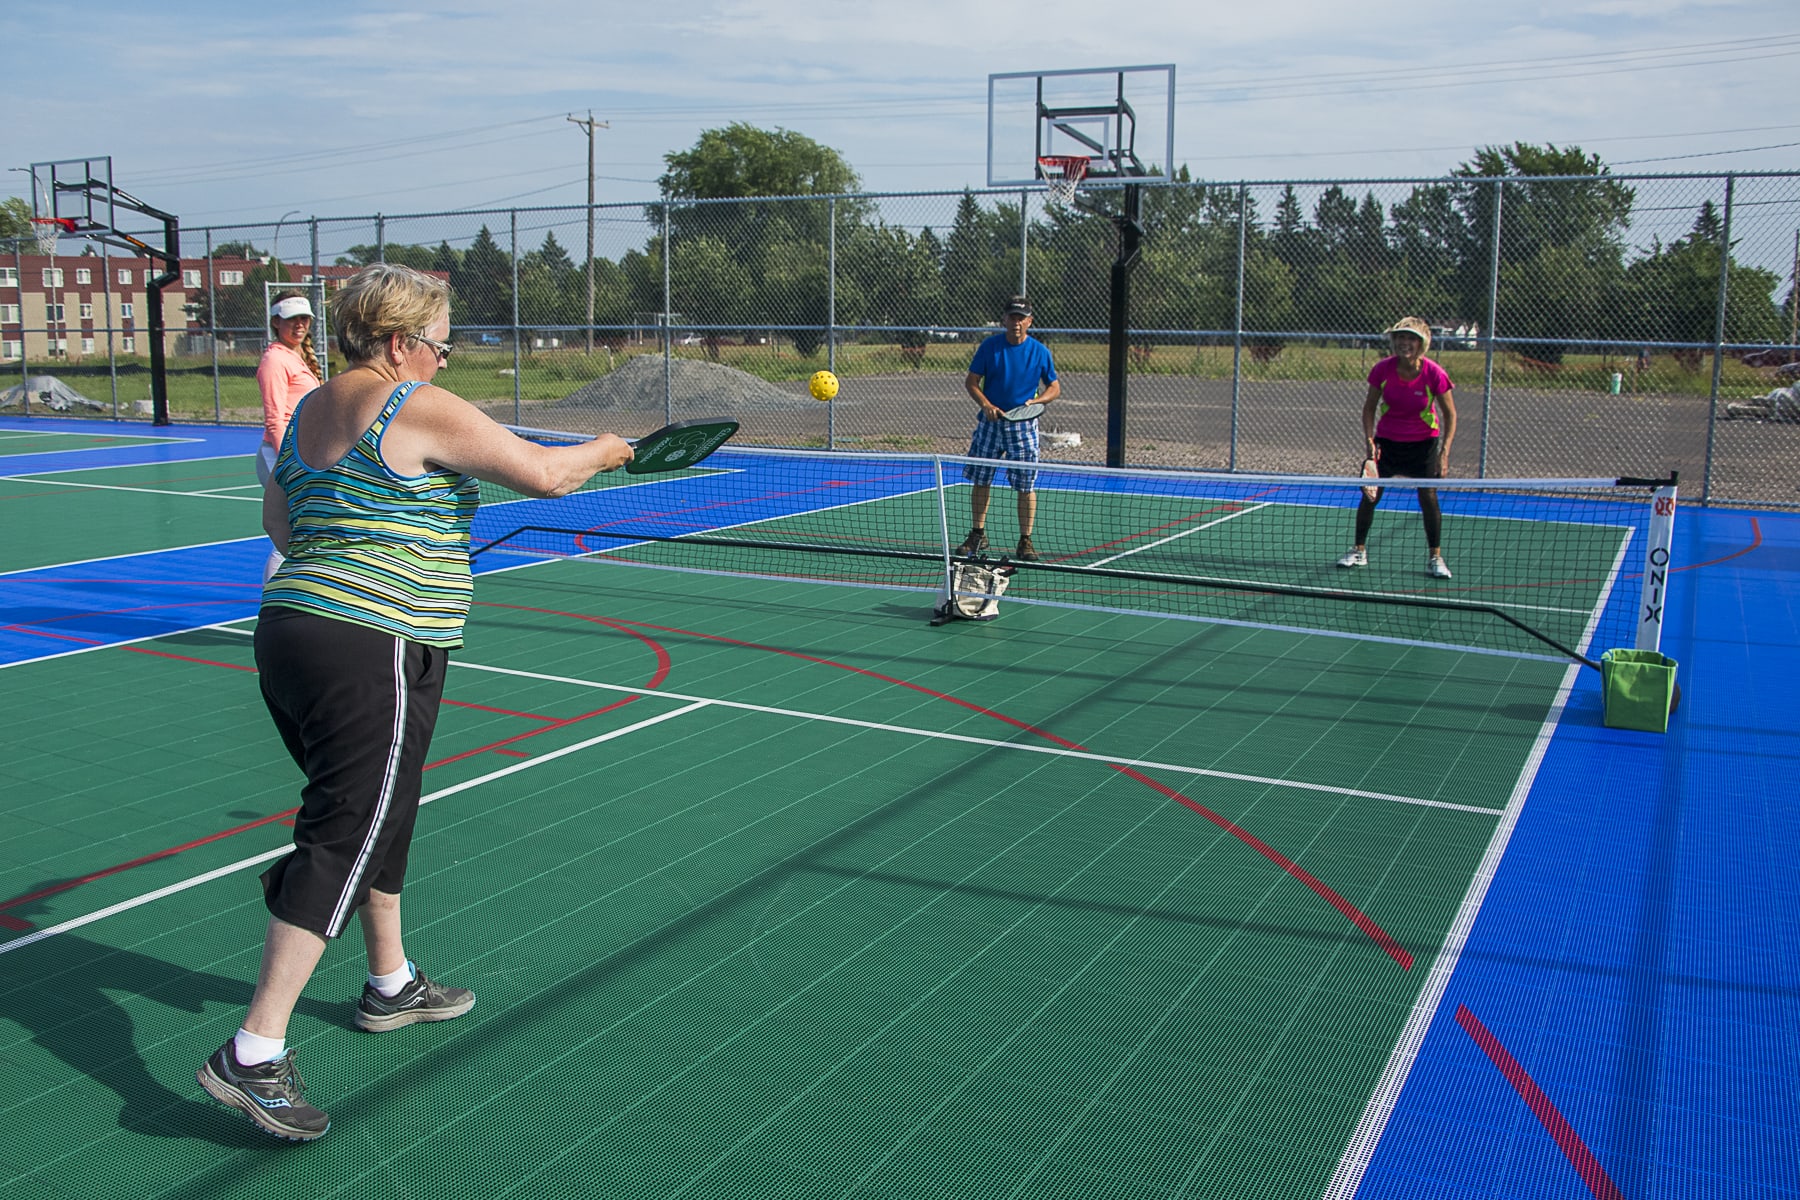 A group of four people playing pickleball on a sunny day at the Sport Court